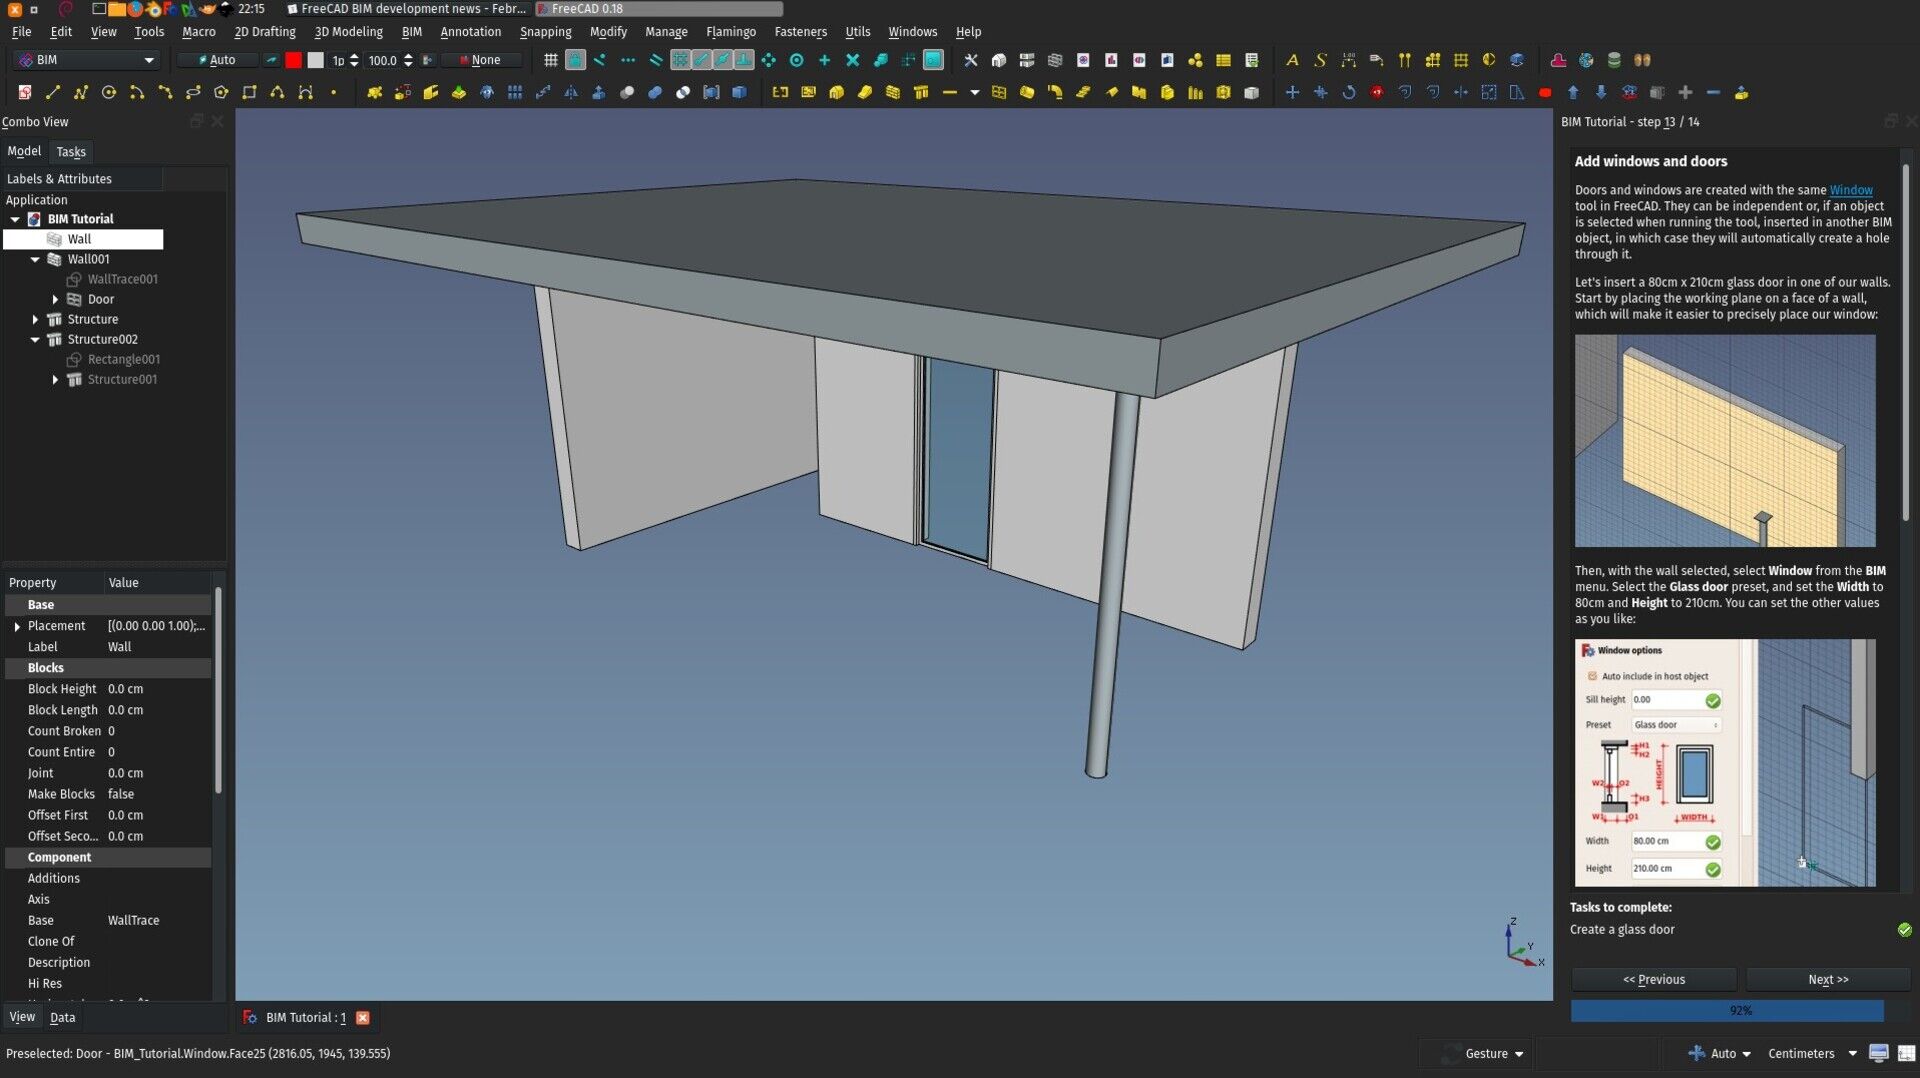 The almost finished BIM
tutorial